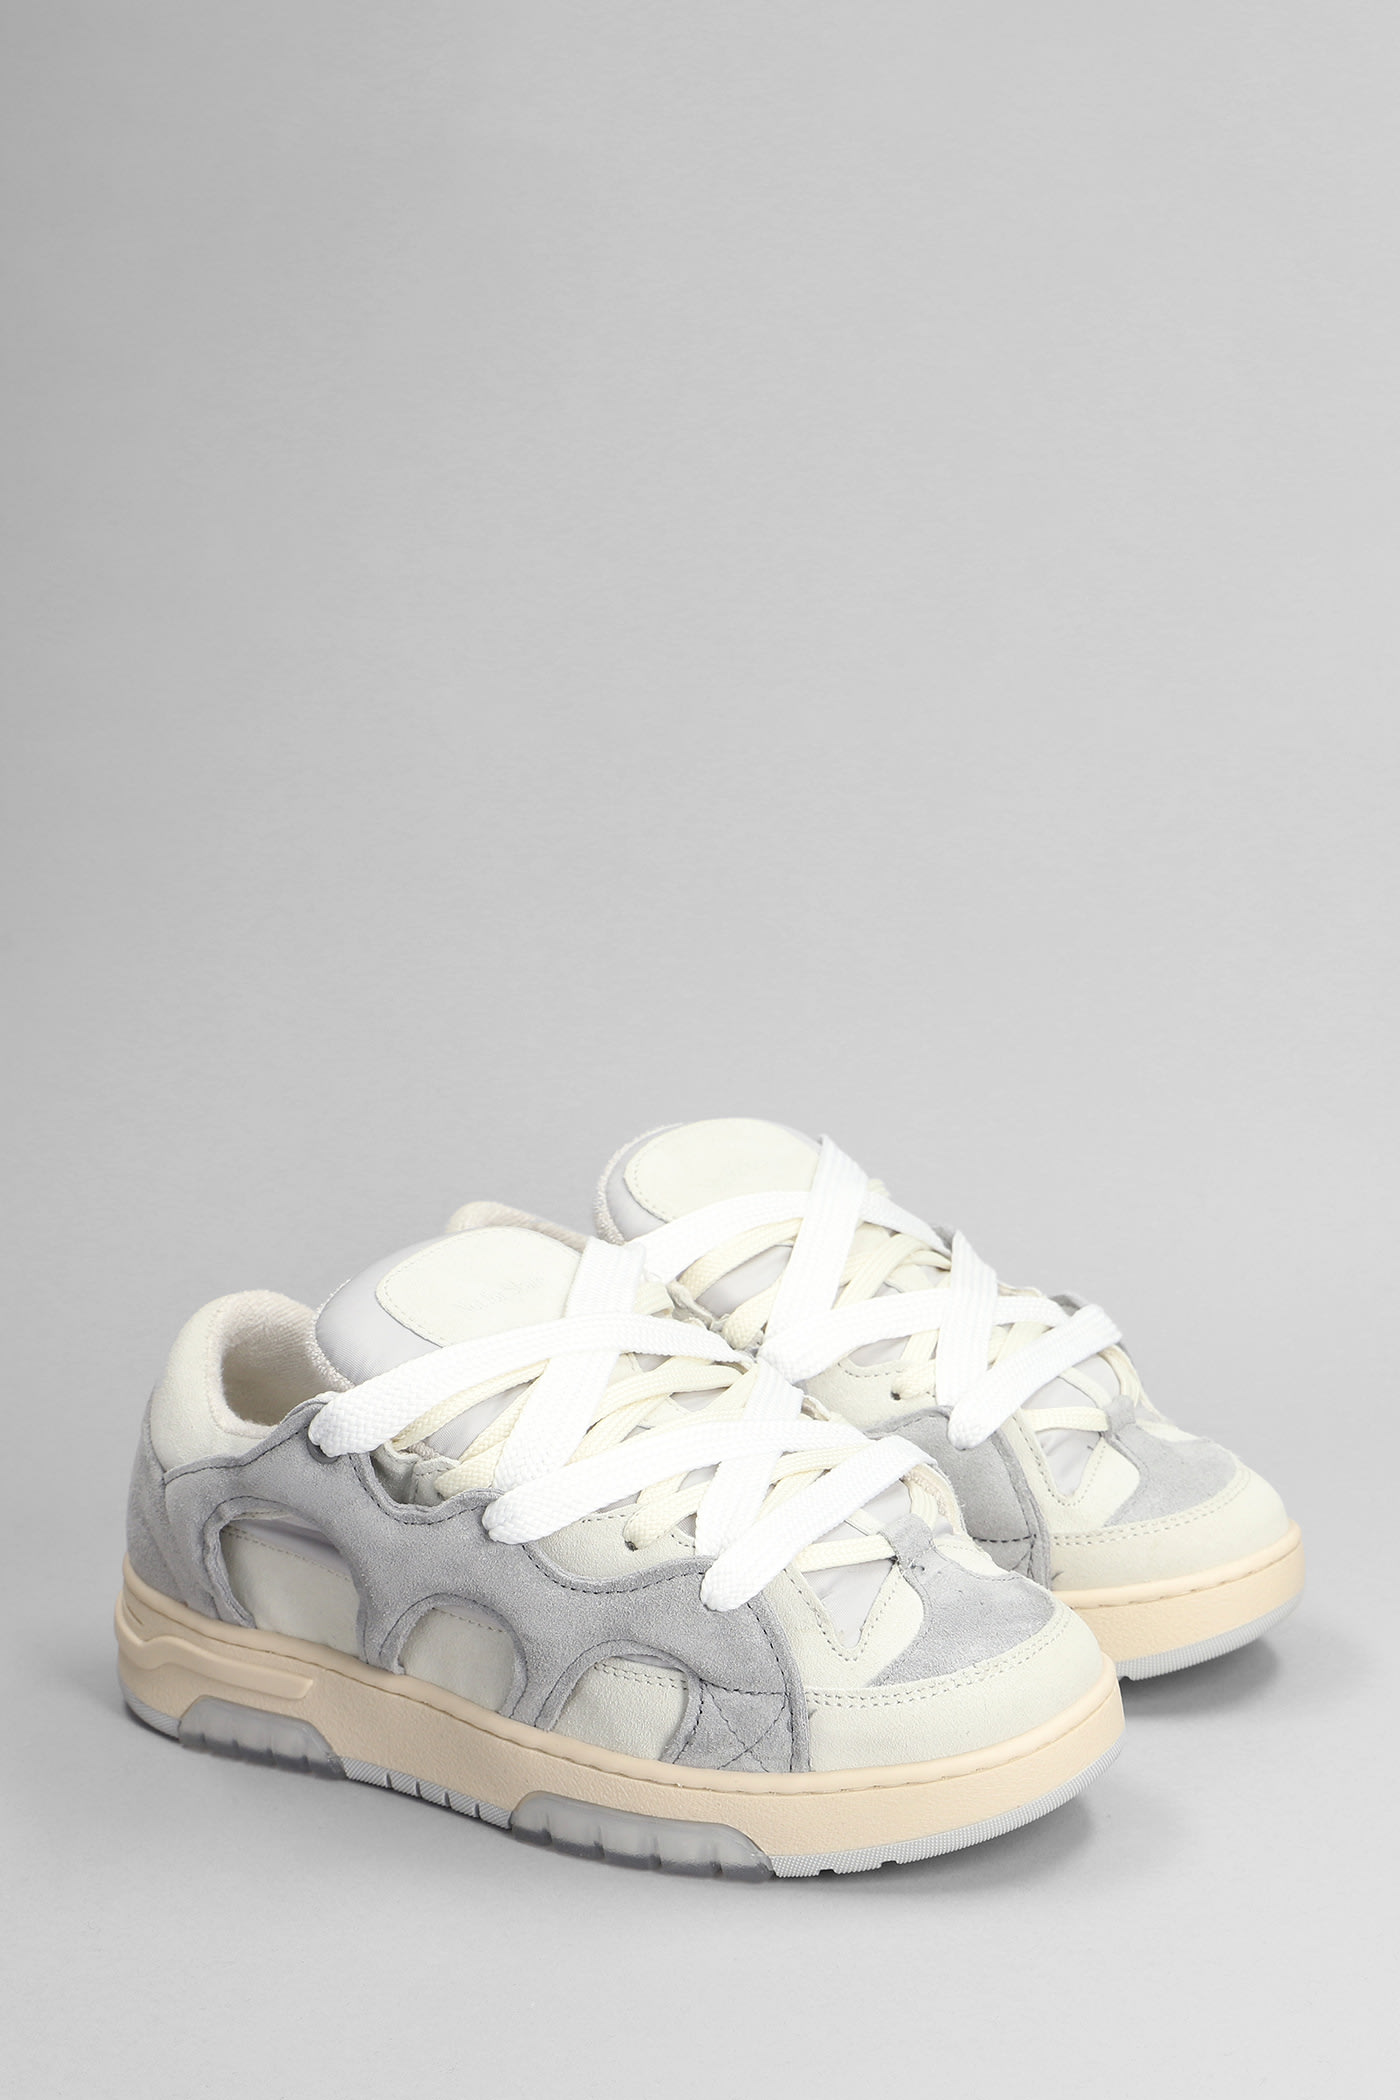 Shop Paura Santha 1 Sneakers In Grey Suede And Fabric